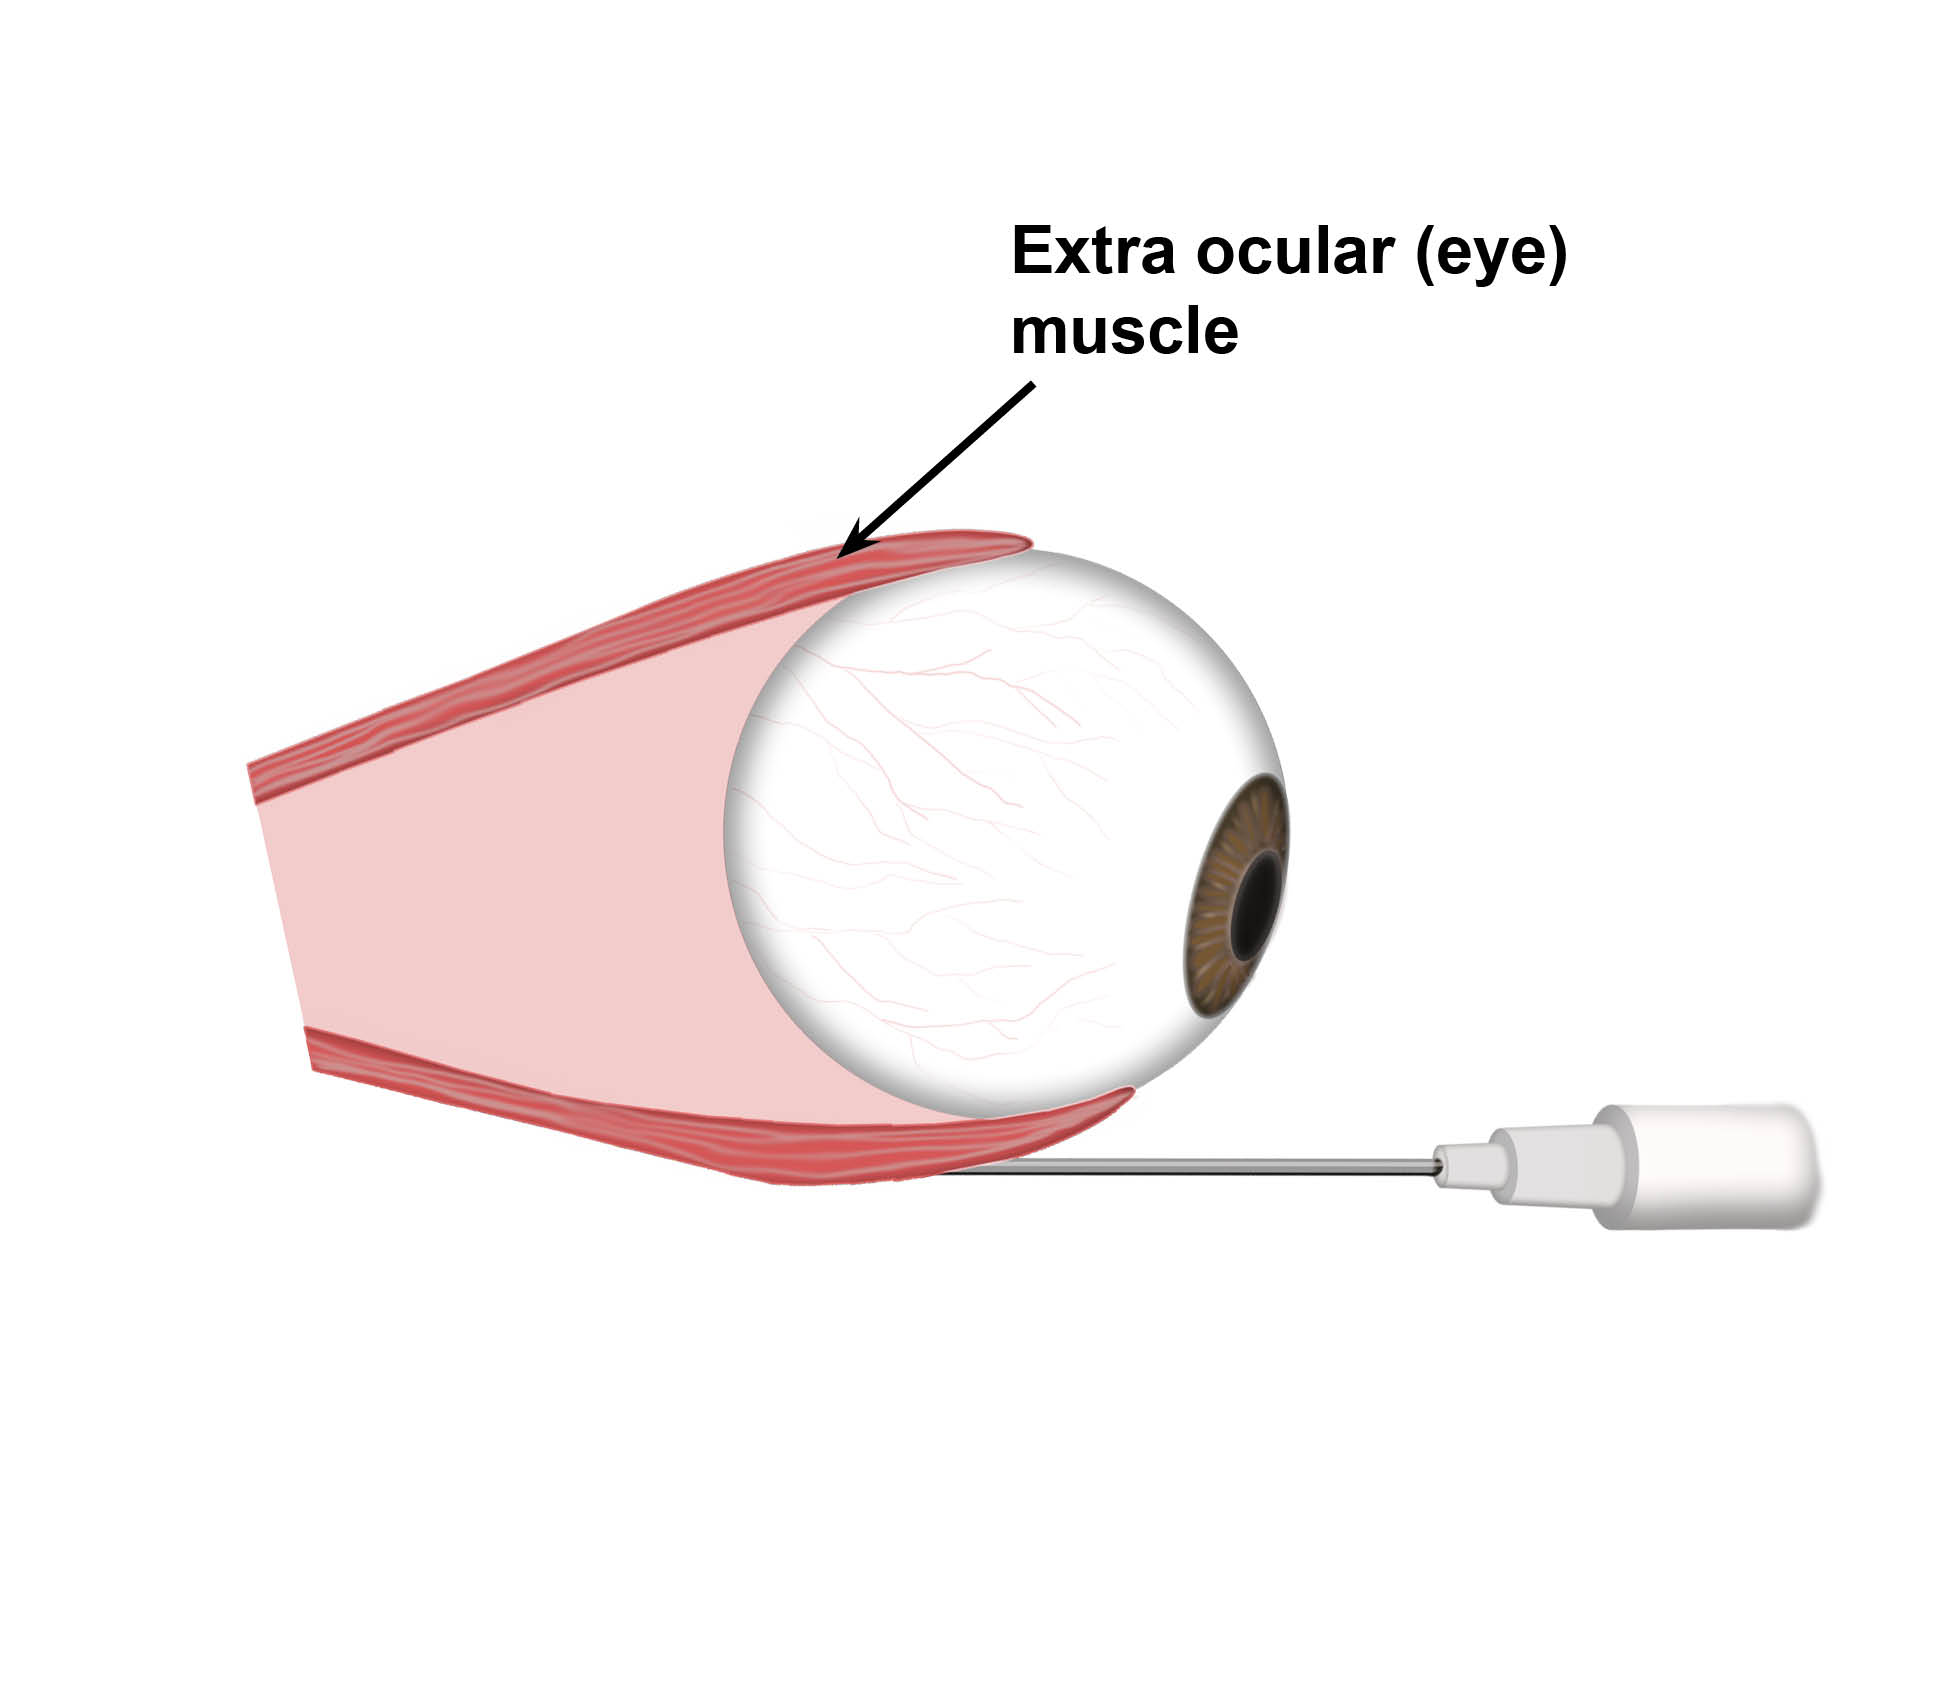 Botulinum toxin injection into extra ocular muscle, for correction of squint